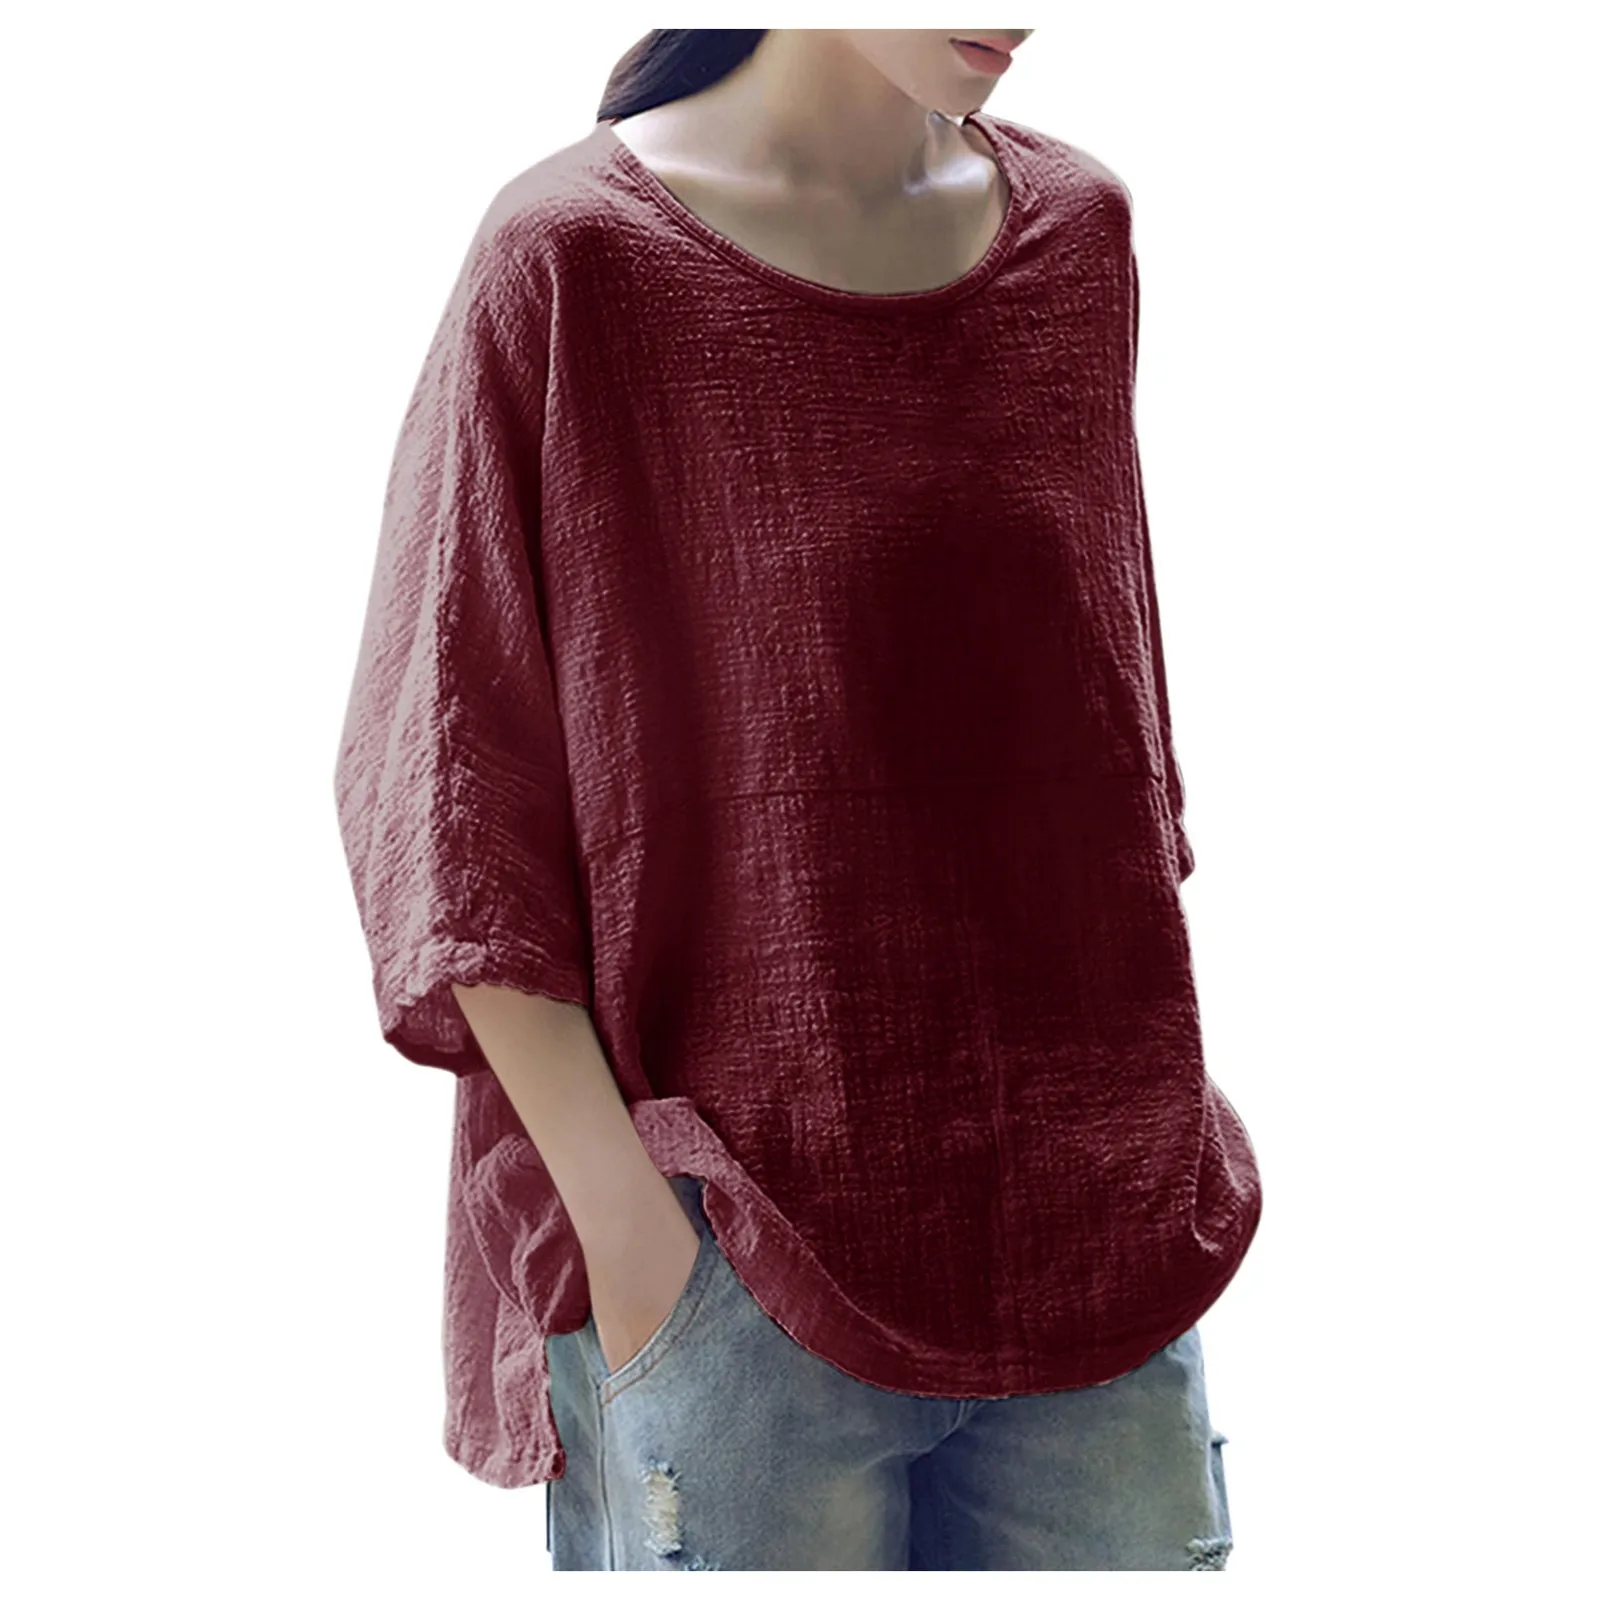 

Women Solid Color Cotton Blend Round Neck Three-quarter Sleeve Top Blusas Y Camisas Femme Блузки Женские Новинки Рубашка Camisa